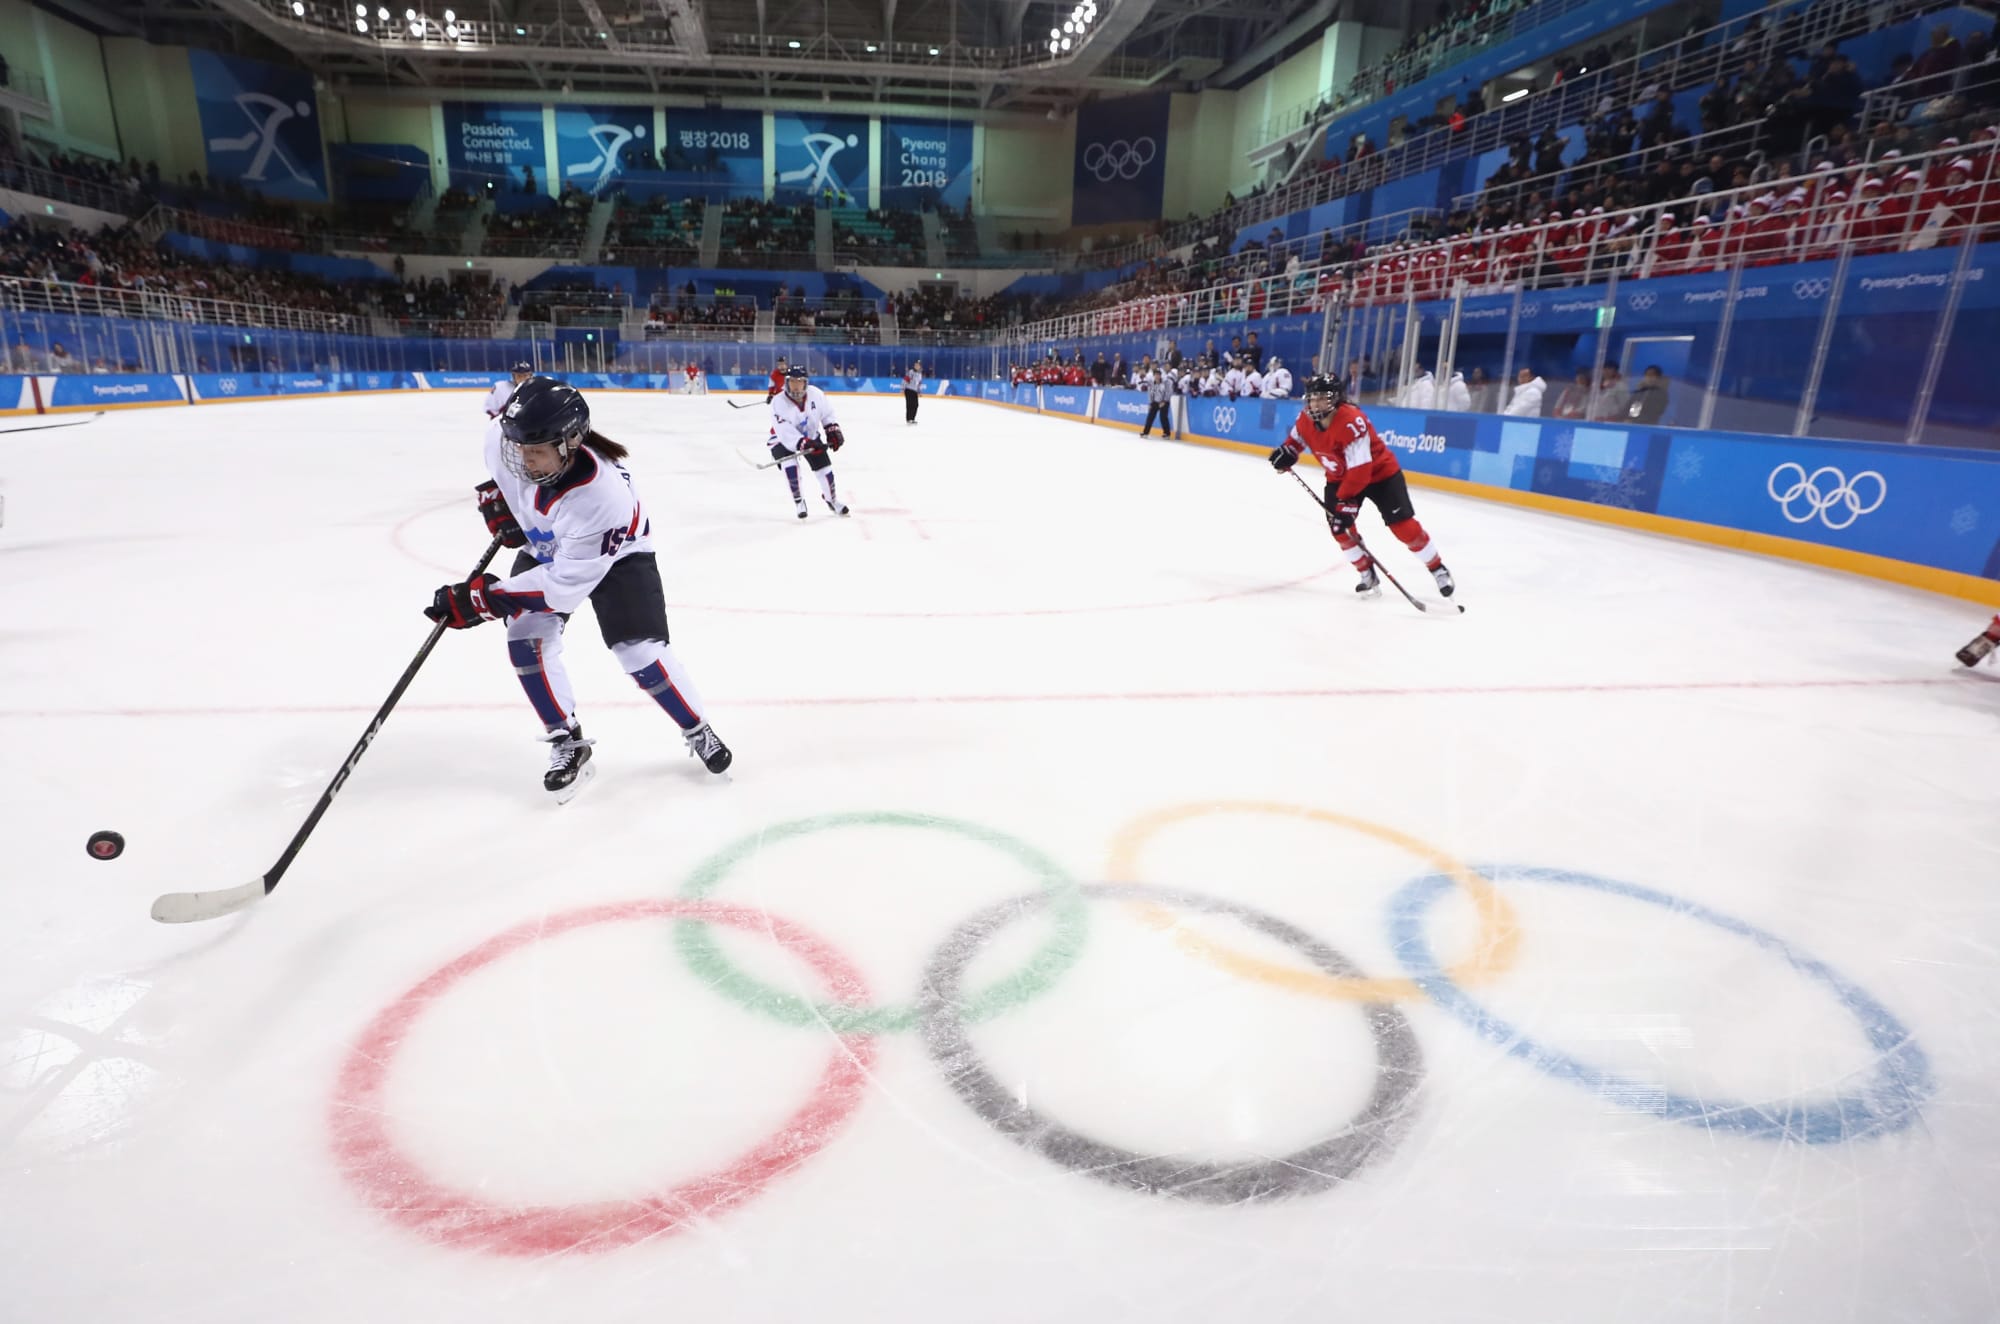 Olympics Ice Hockey Gold medal games shouldn't have shootouts